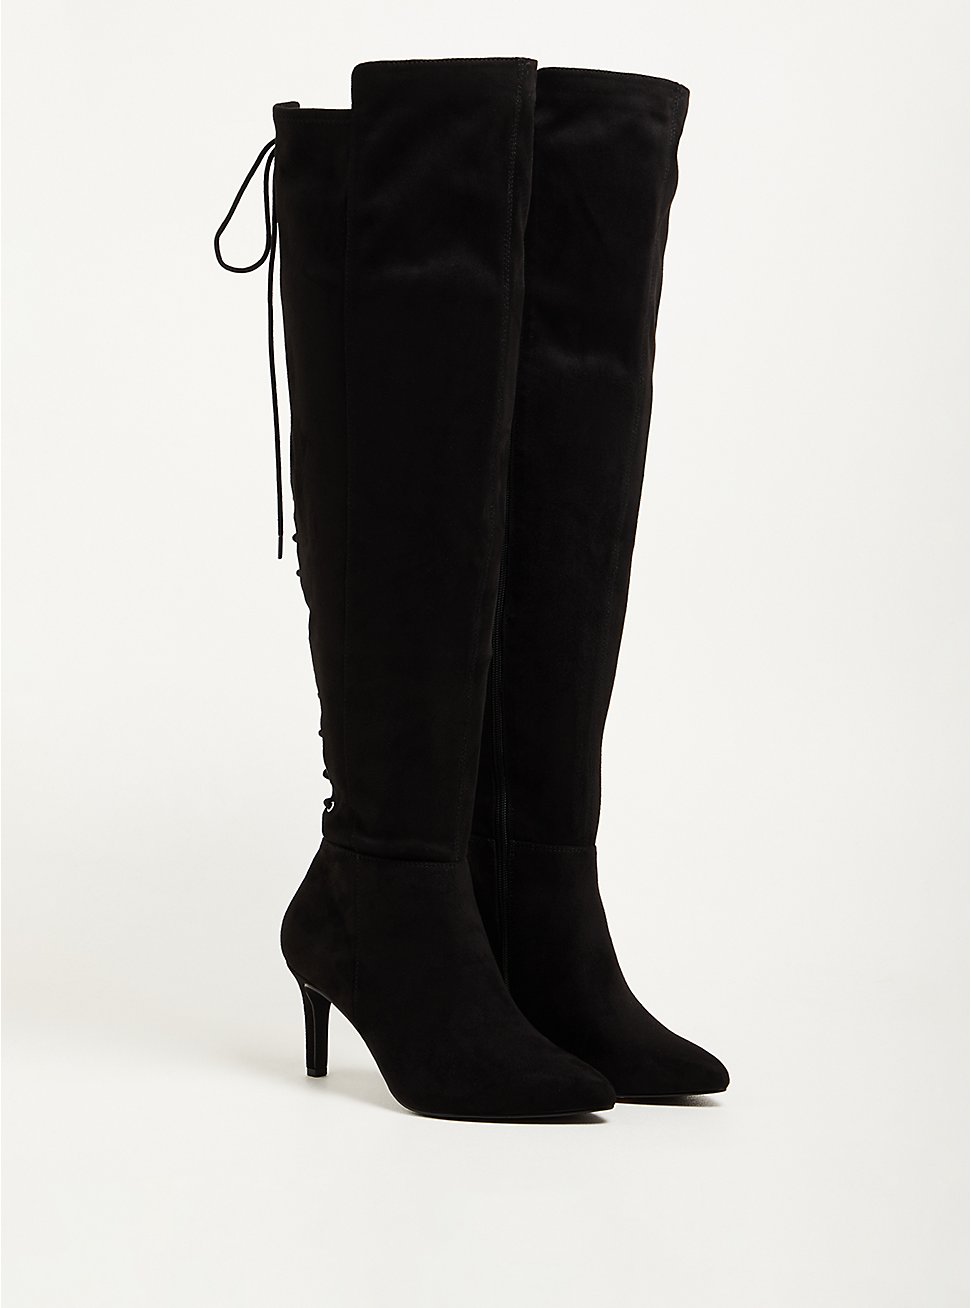 Plus Size Stiletto Over The Knee Boot - Stretch Faux Suede Black (WW), BLACK, hi-res